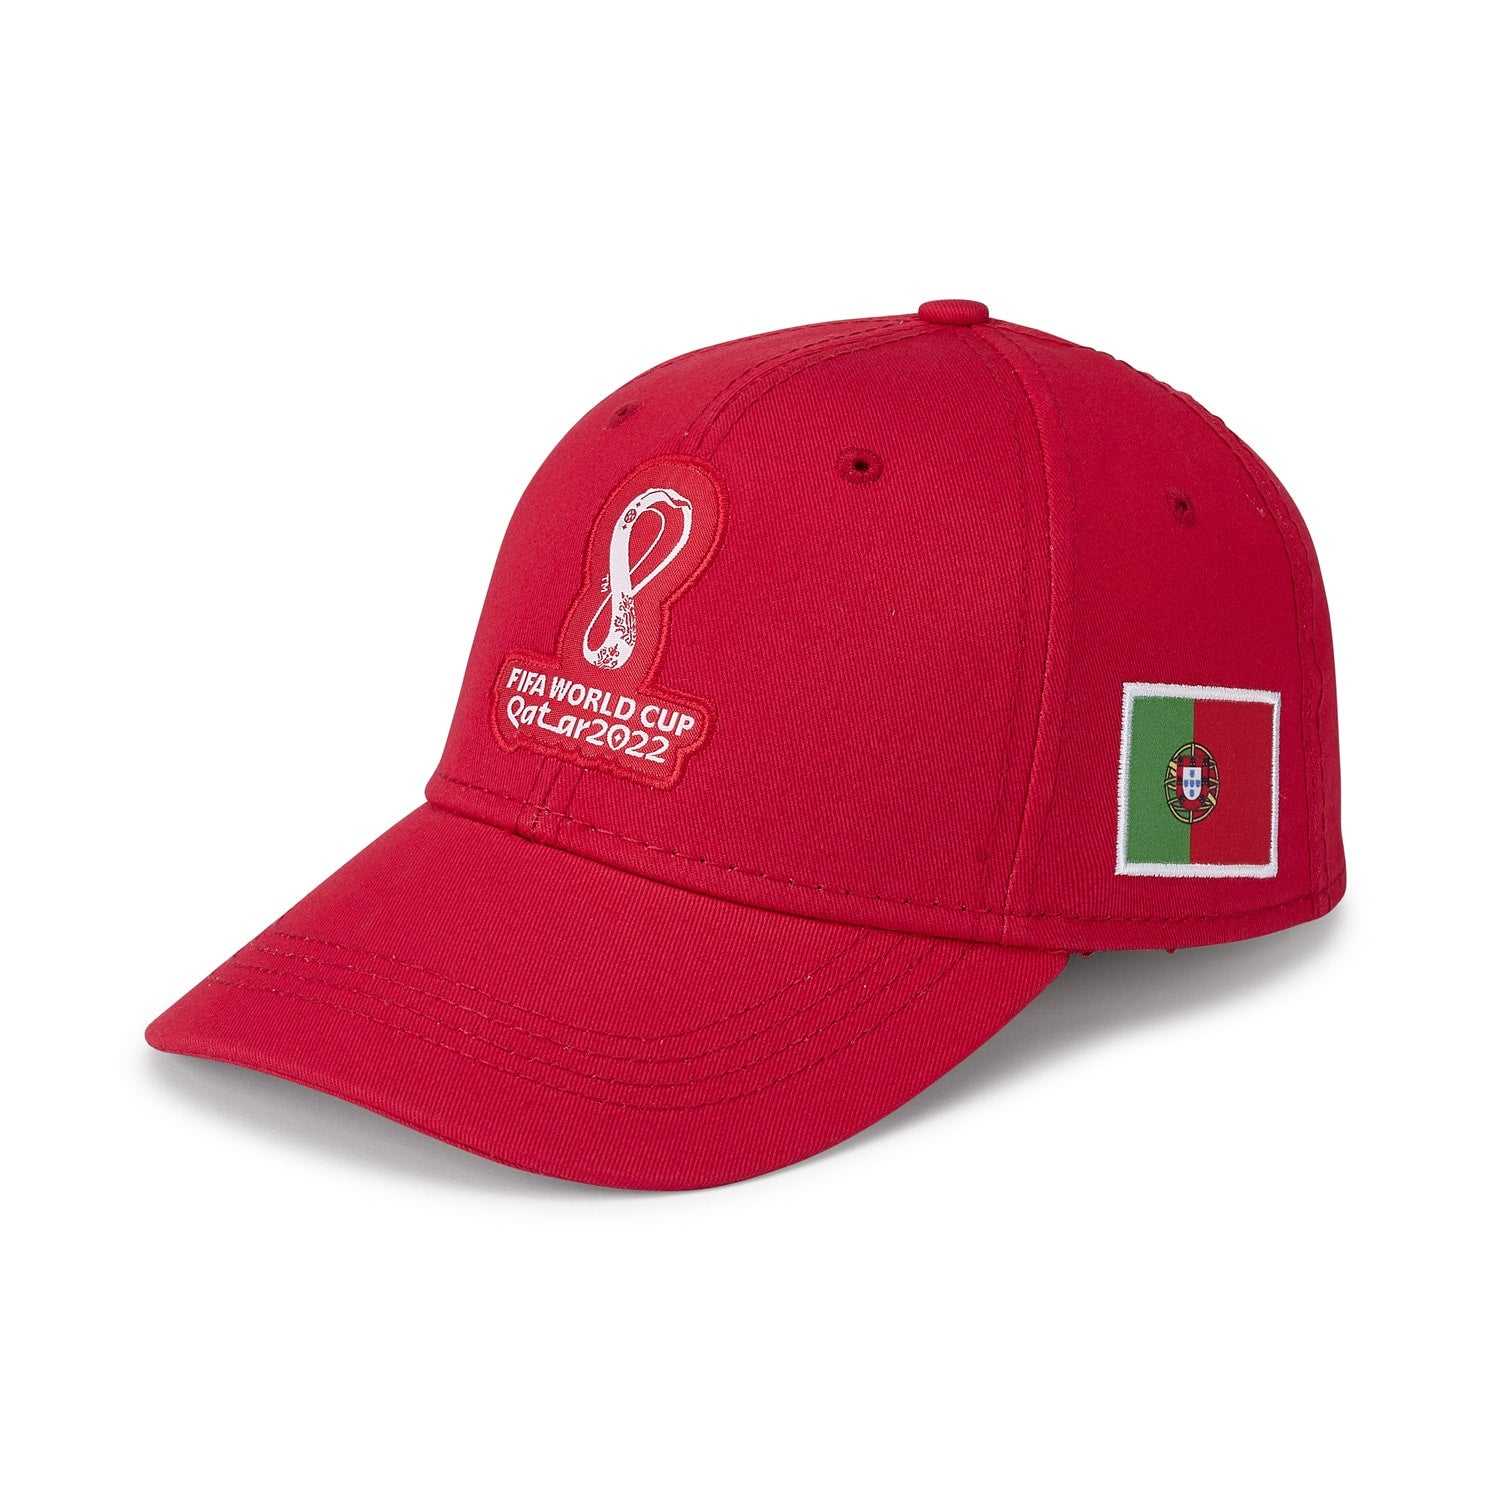 2022 World Cup Portugal Red Cap - Men's